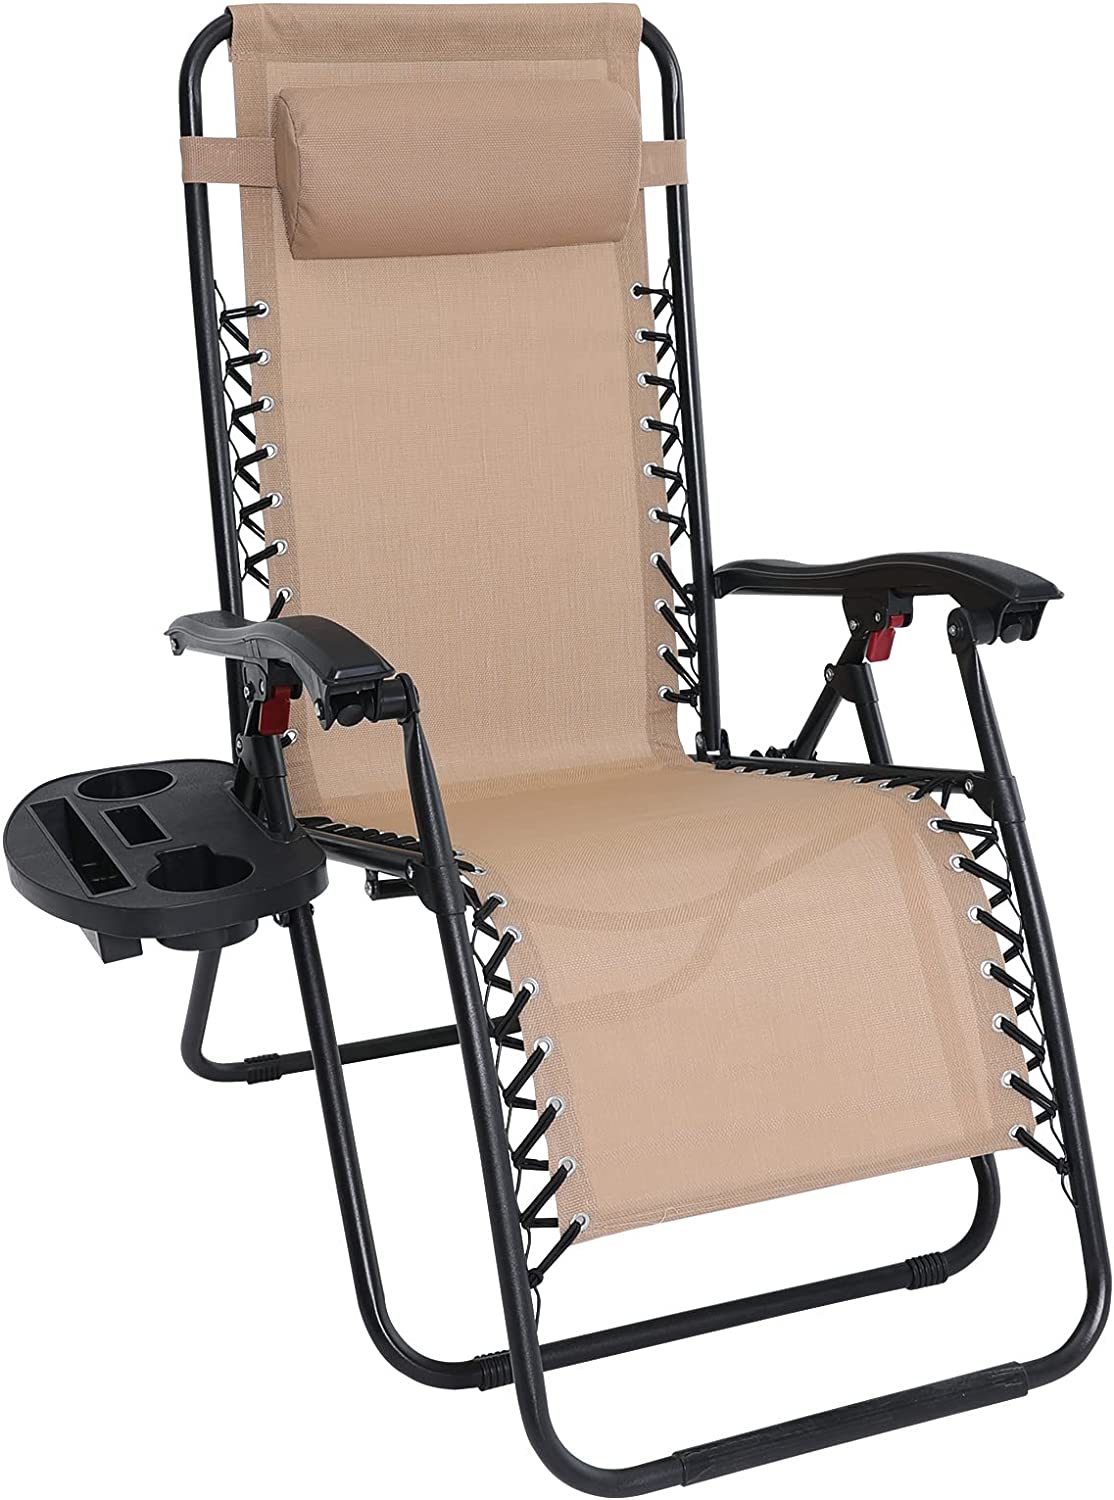 Abccanopy Zero Gravity Adjustable Reclining Patio Chair Lounge Chair With, Beige - $115.99